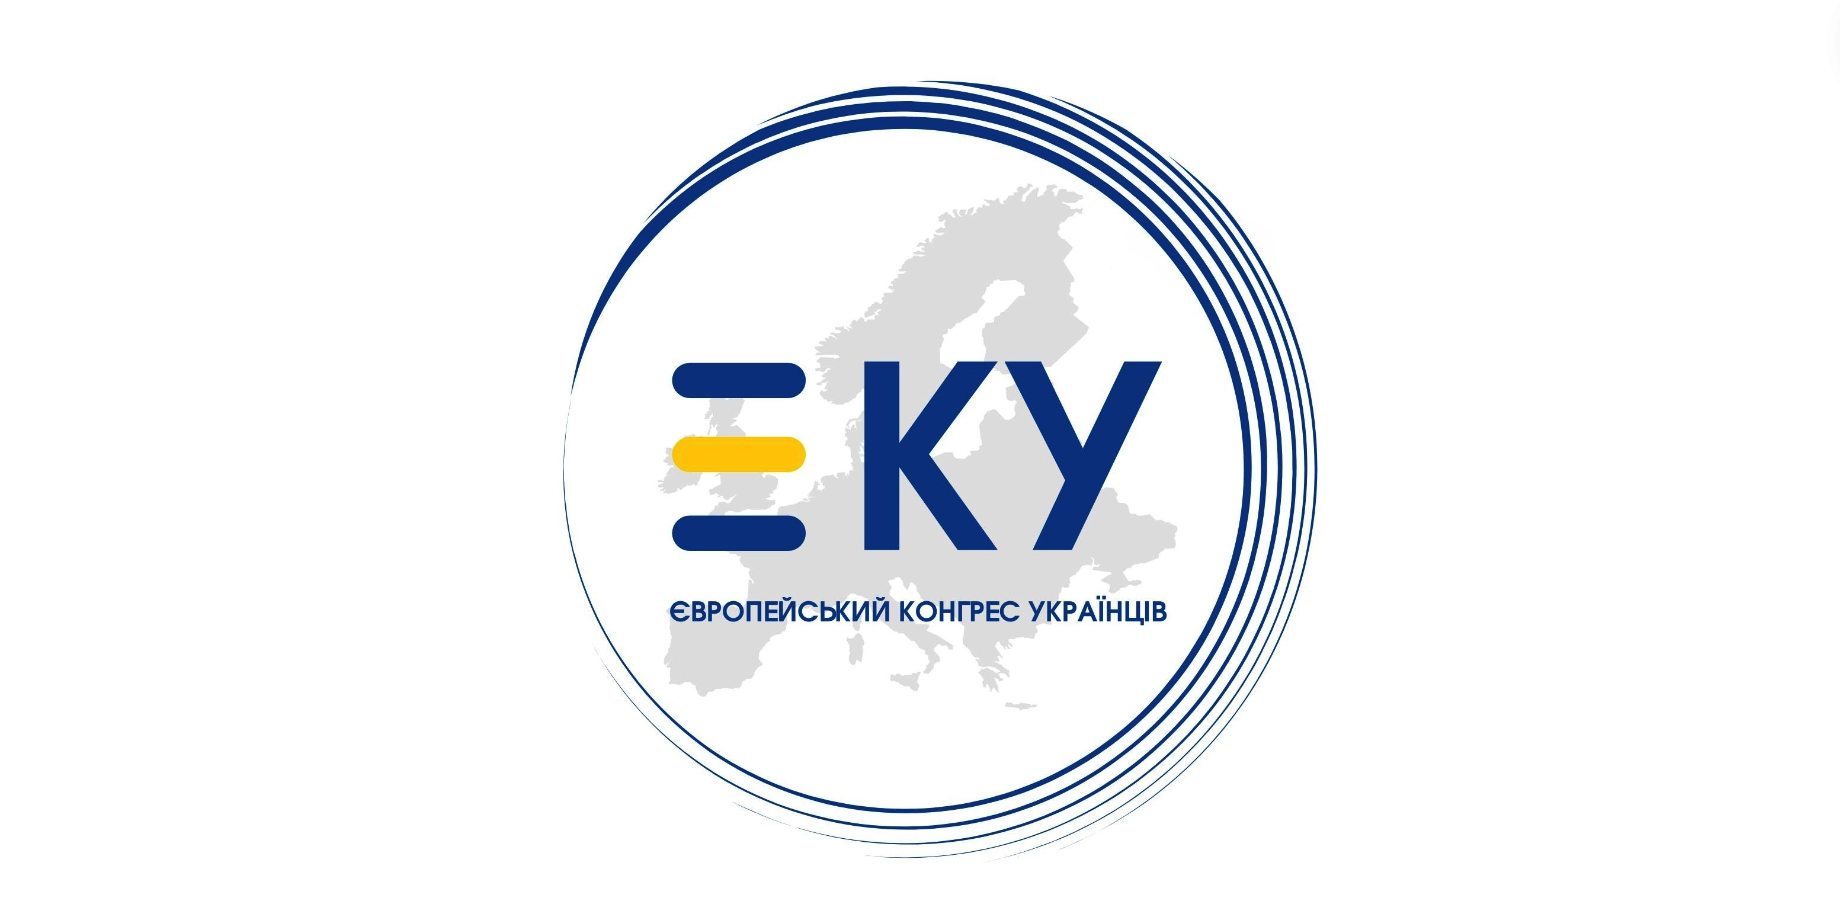 75 years of ECU: leaders to discuss history and diaspora contribution in Europe